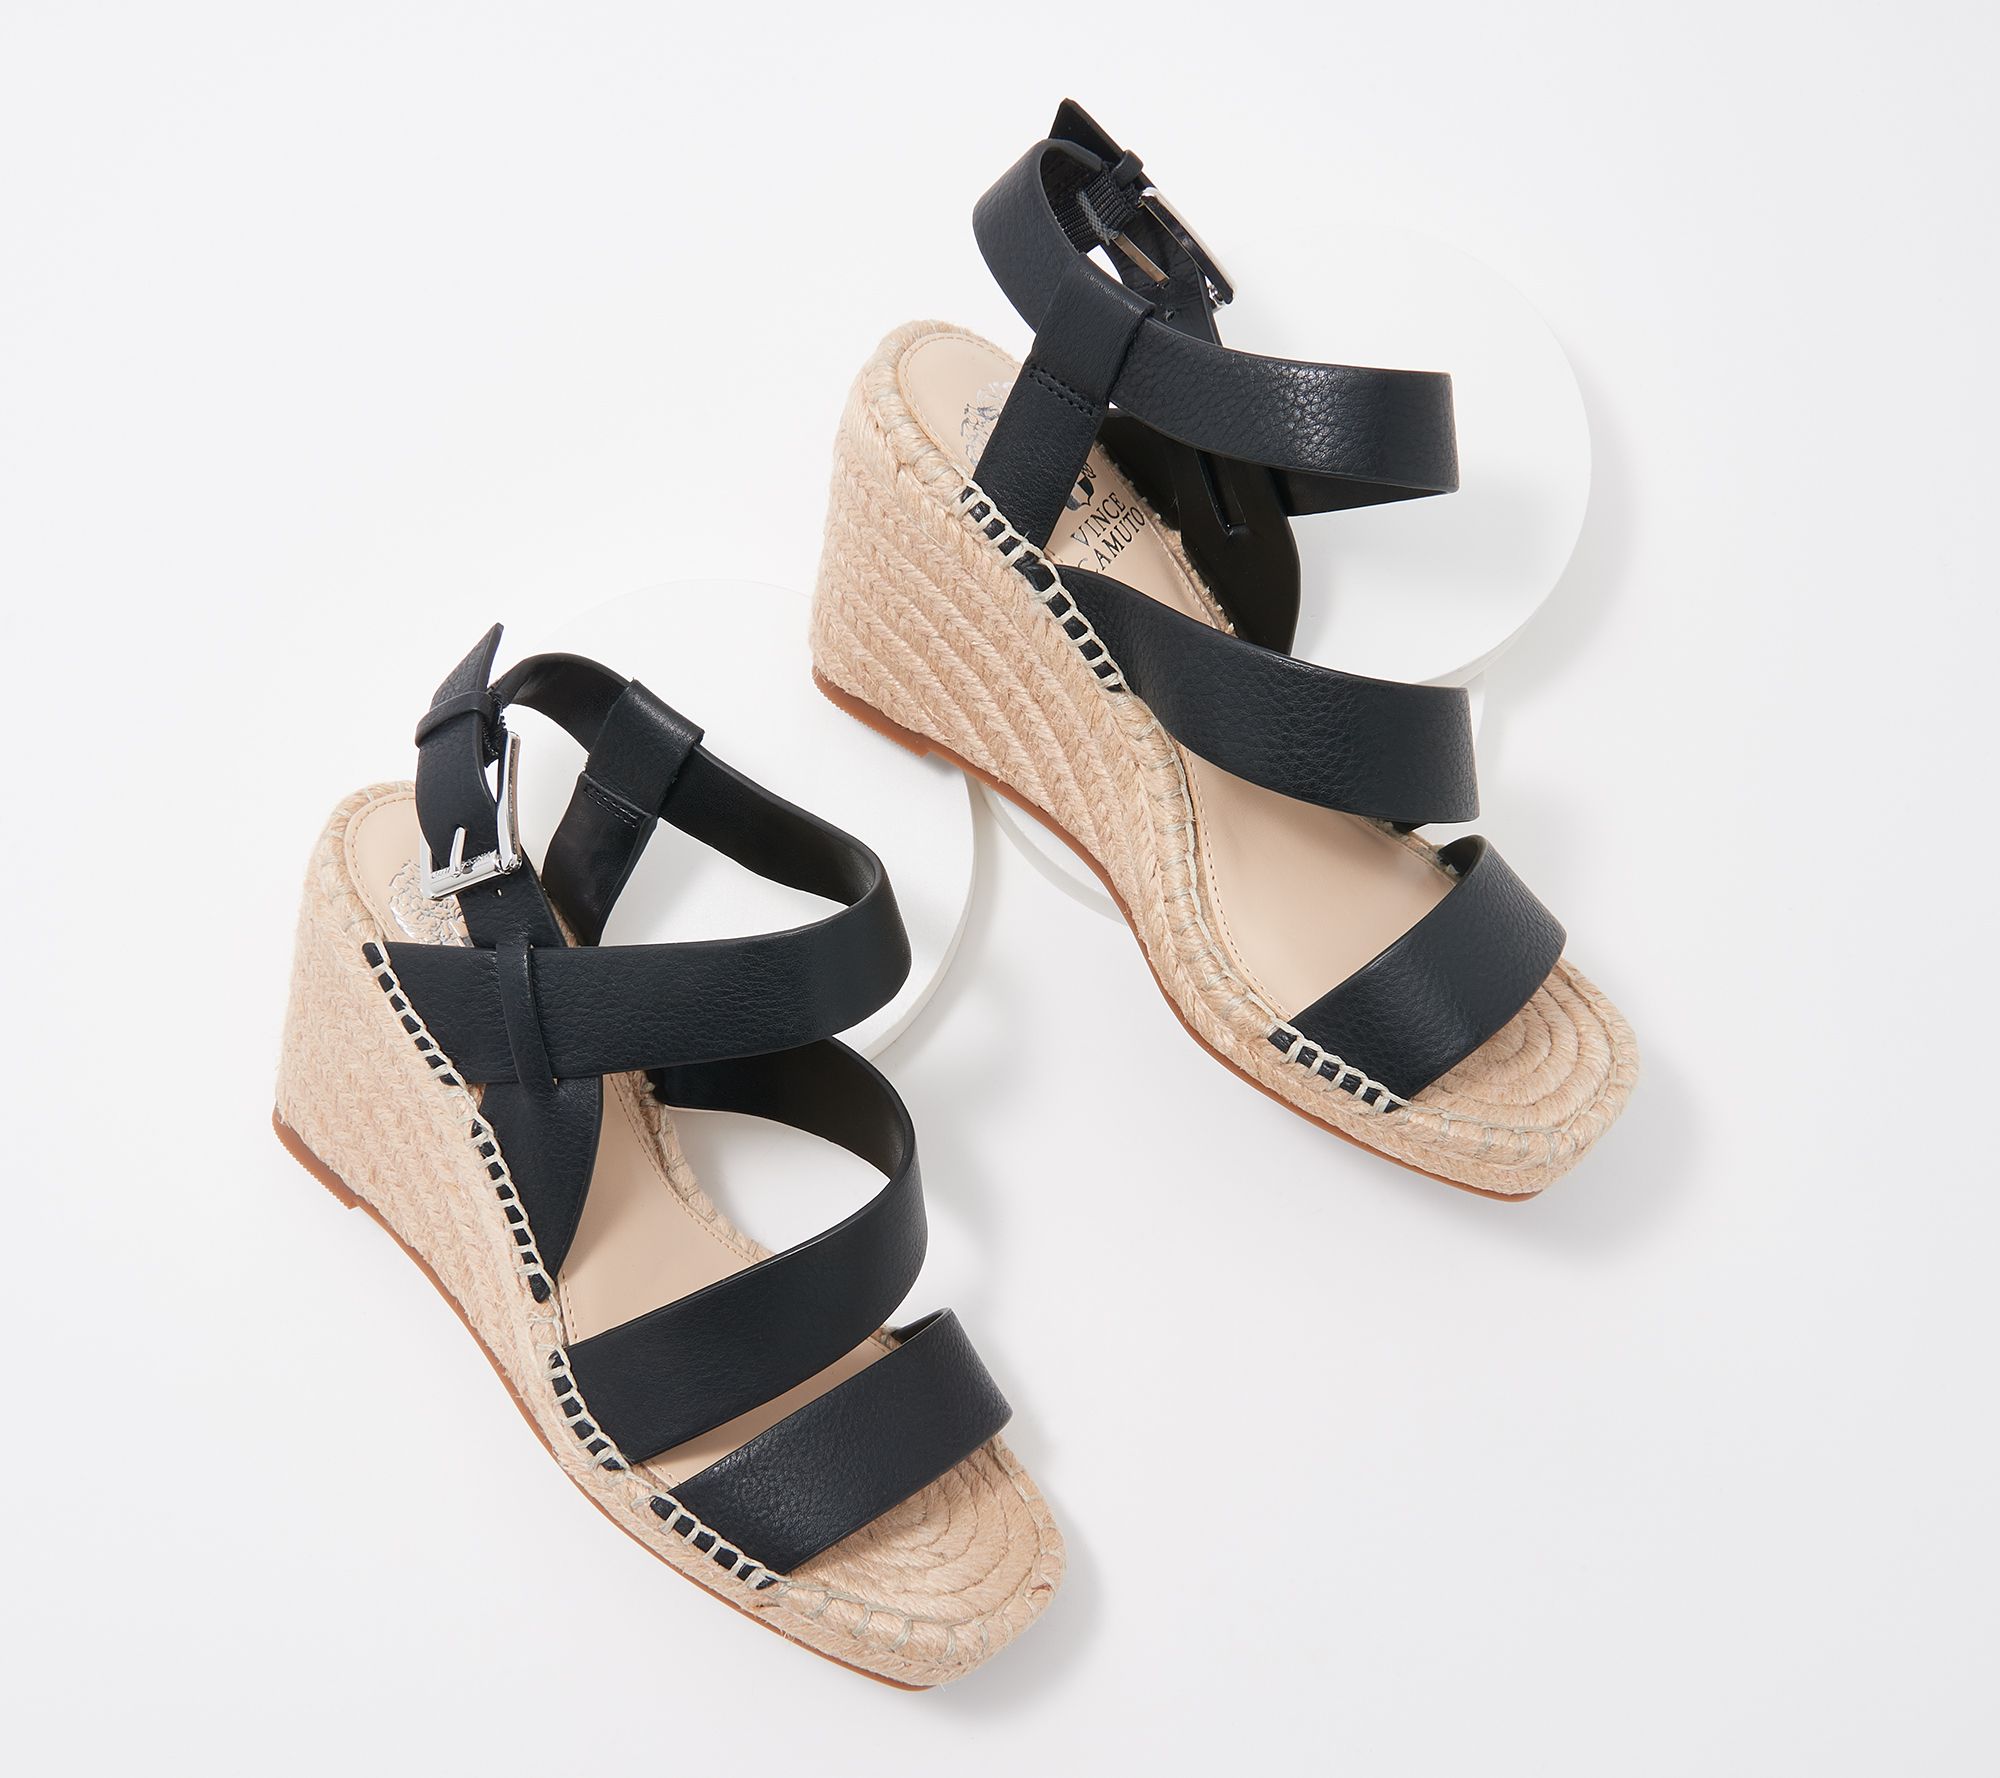 vince camuto tan wedges